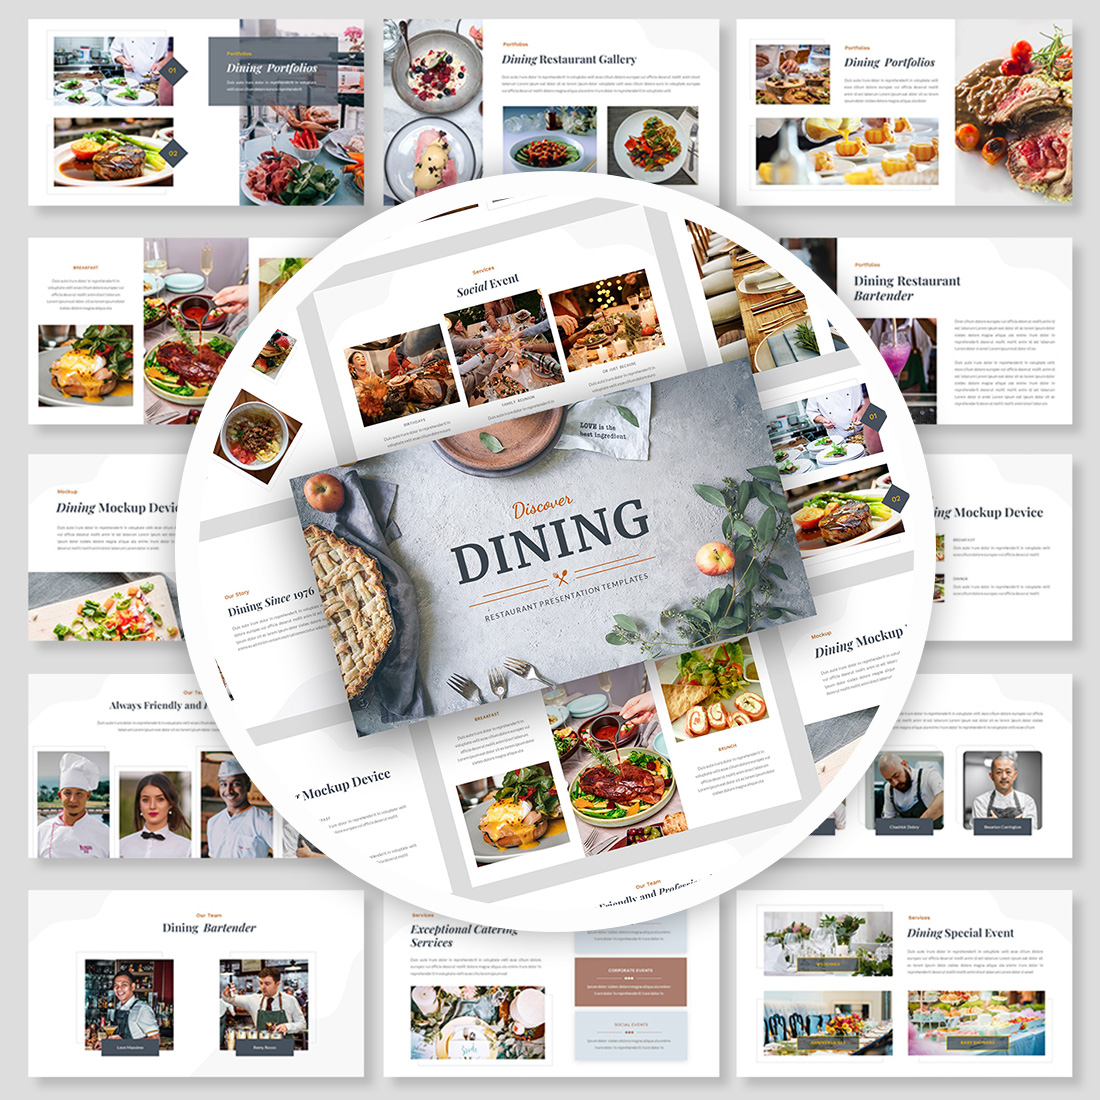 Dining - Restaurant Presentation PowerPoint Template main cover.